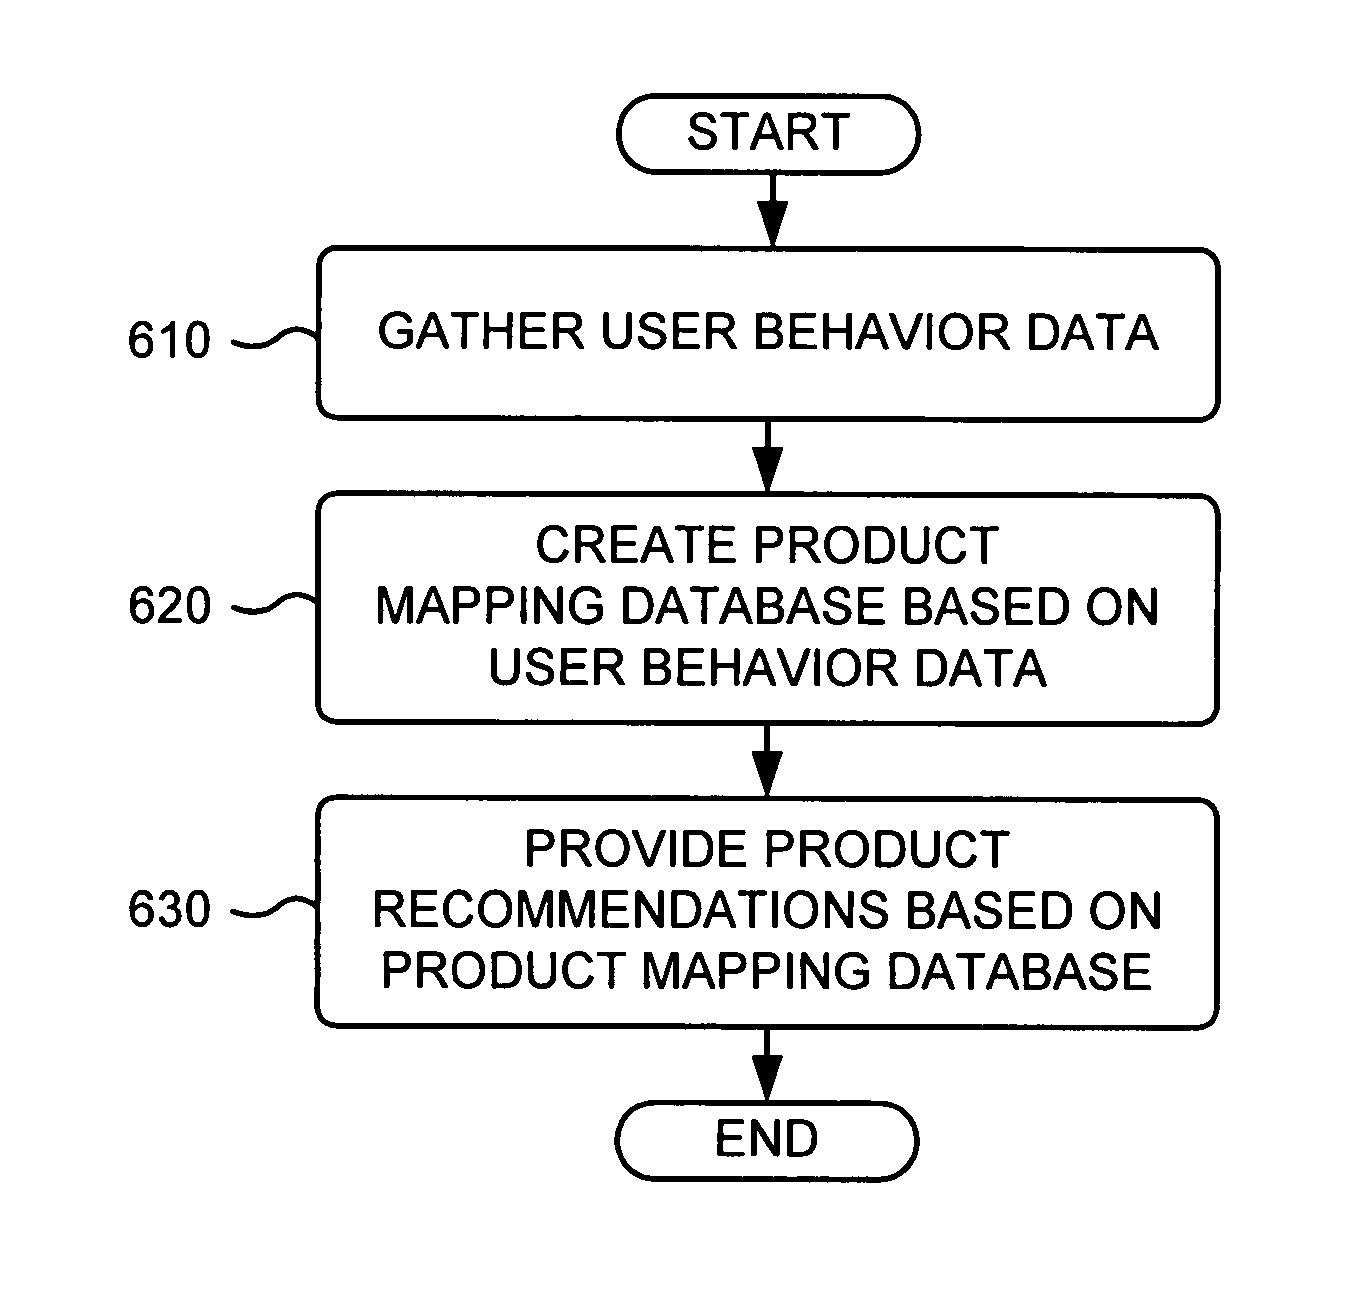 Product recommendations based on collaborative filtering of user data